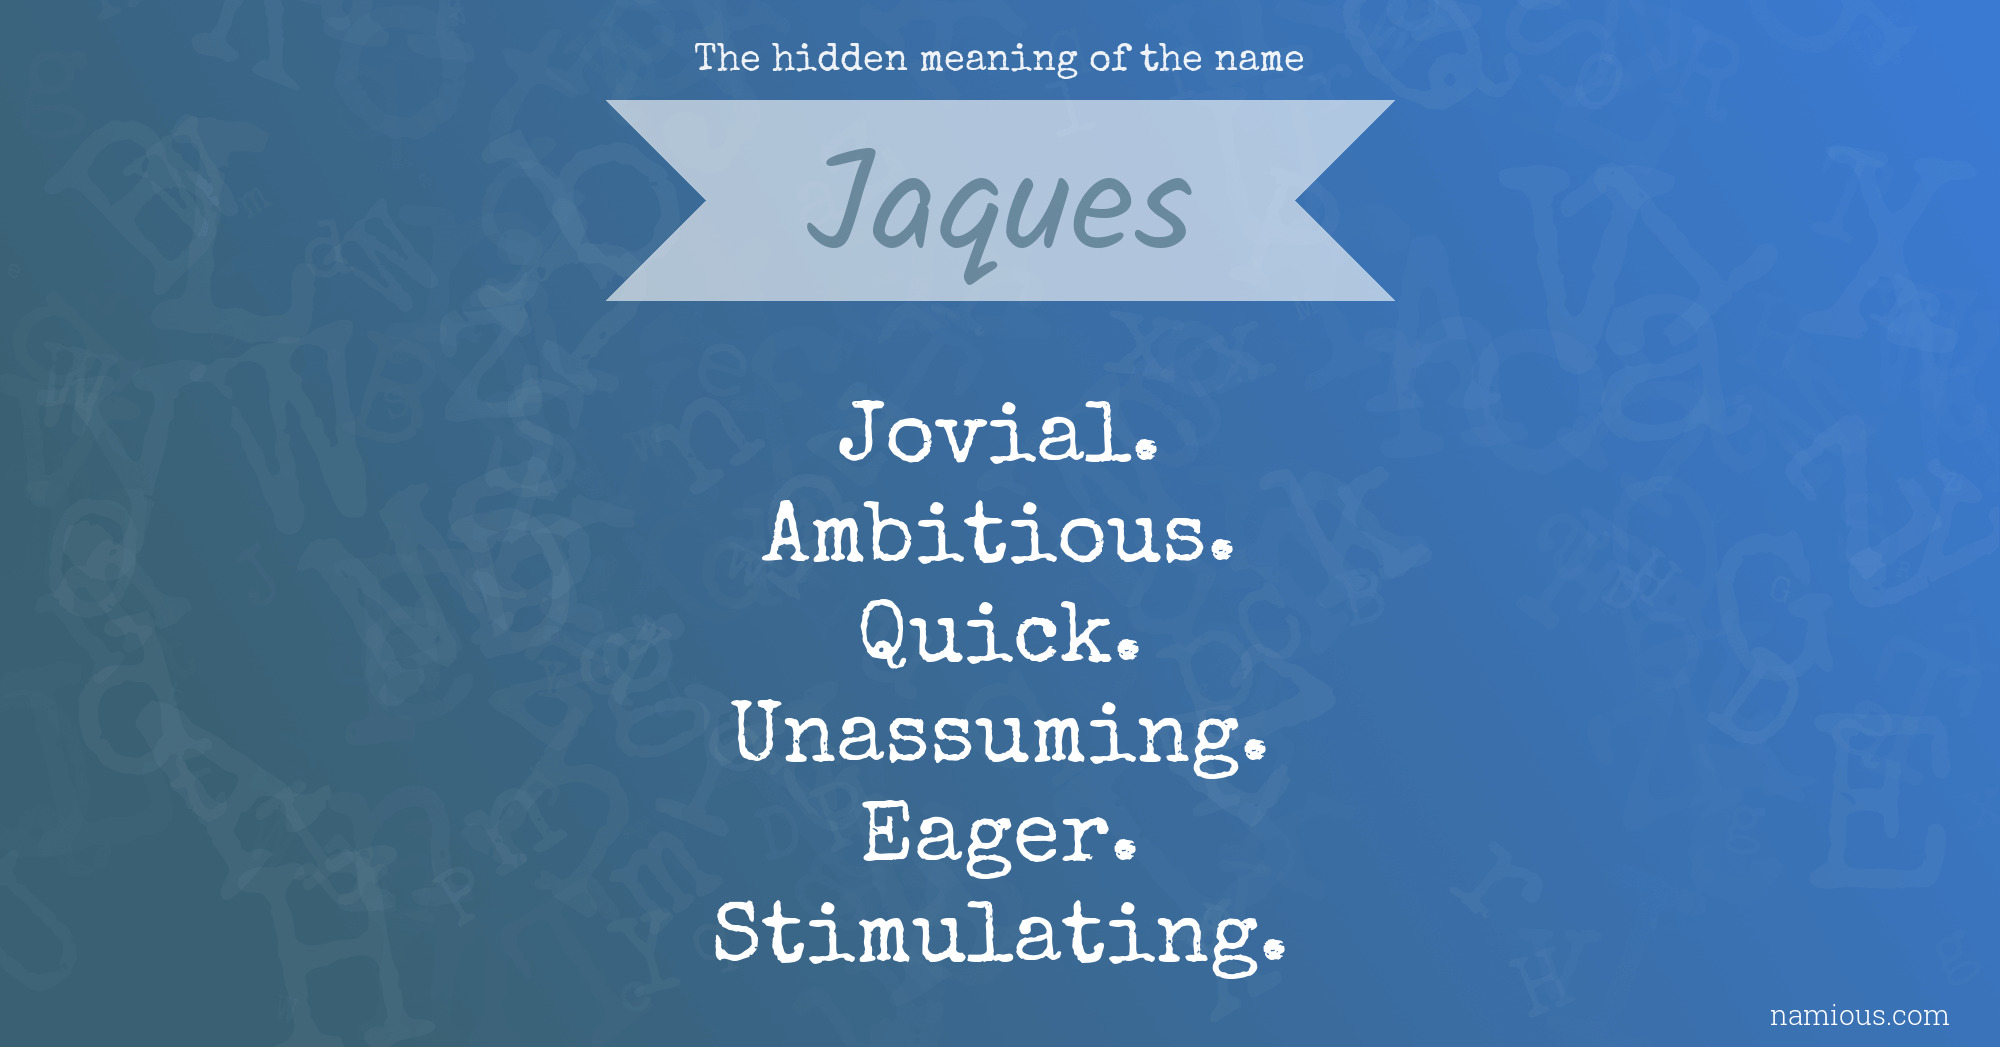 The hidden meaning of the name Jaques